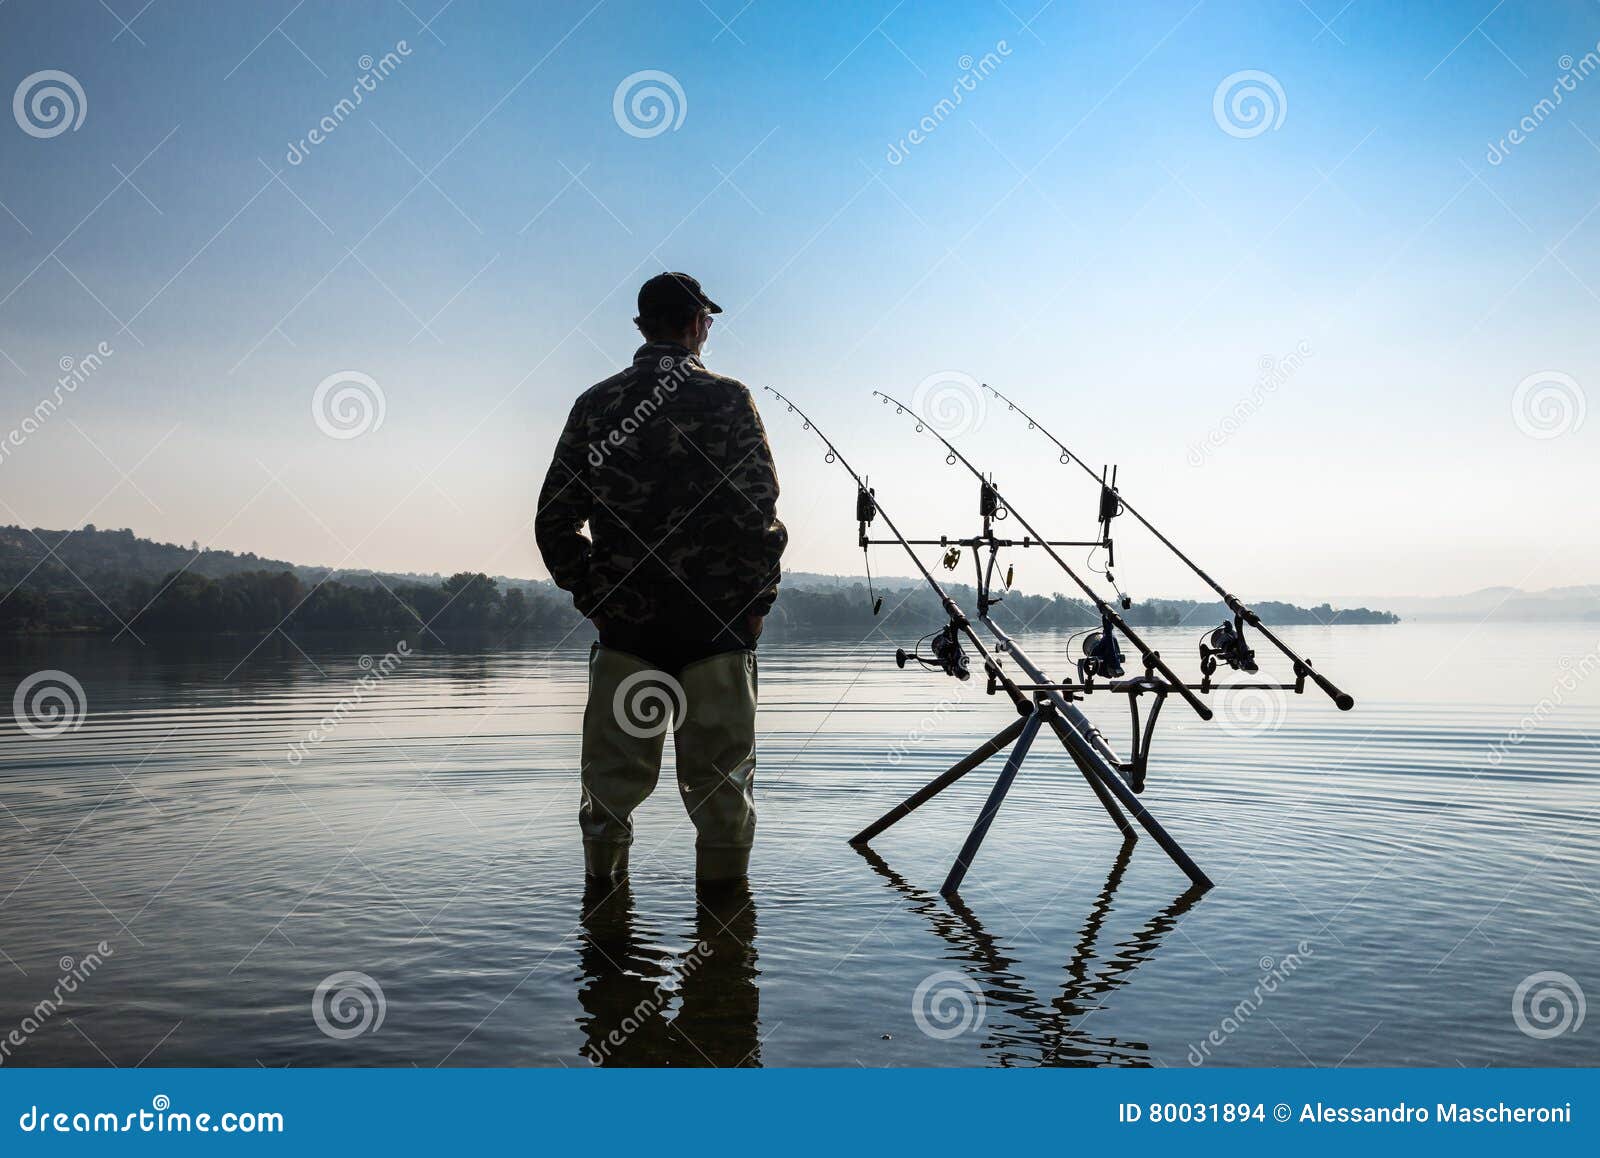 Fishing Adventures. Fisherman Waiting To Catch a Fish with Carp